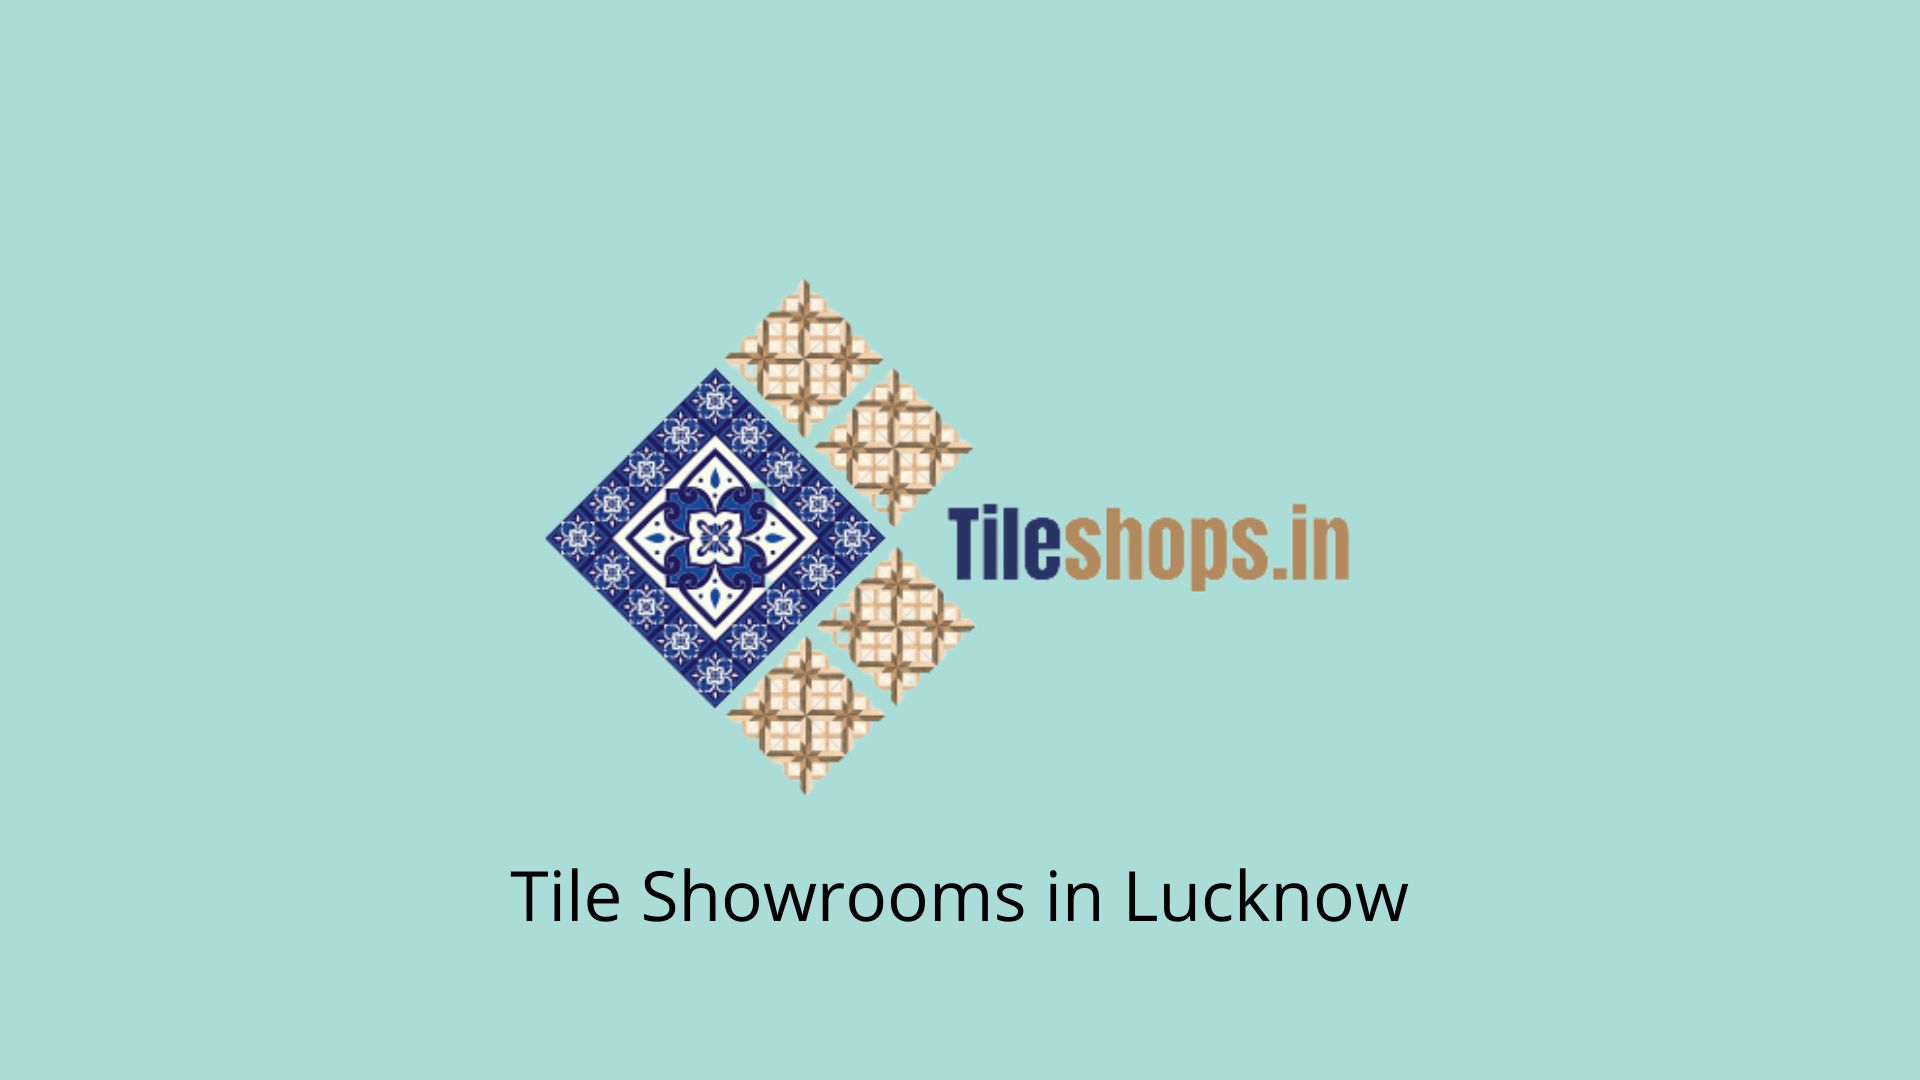 Tile Showrooms in Lucknow